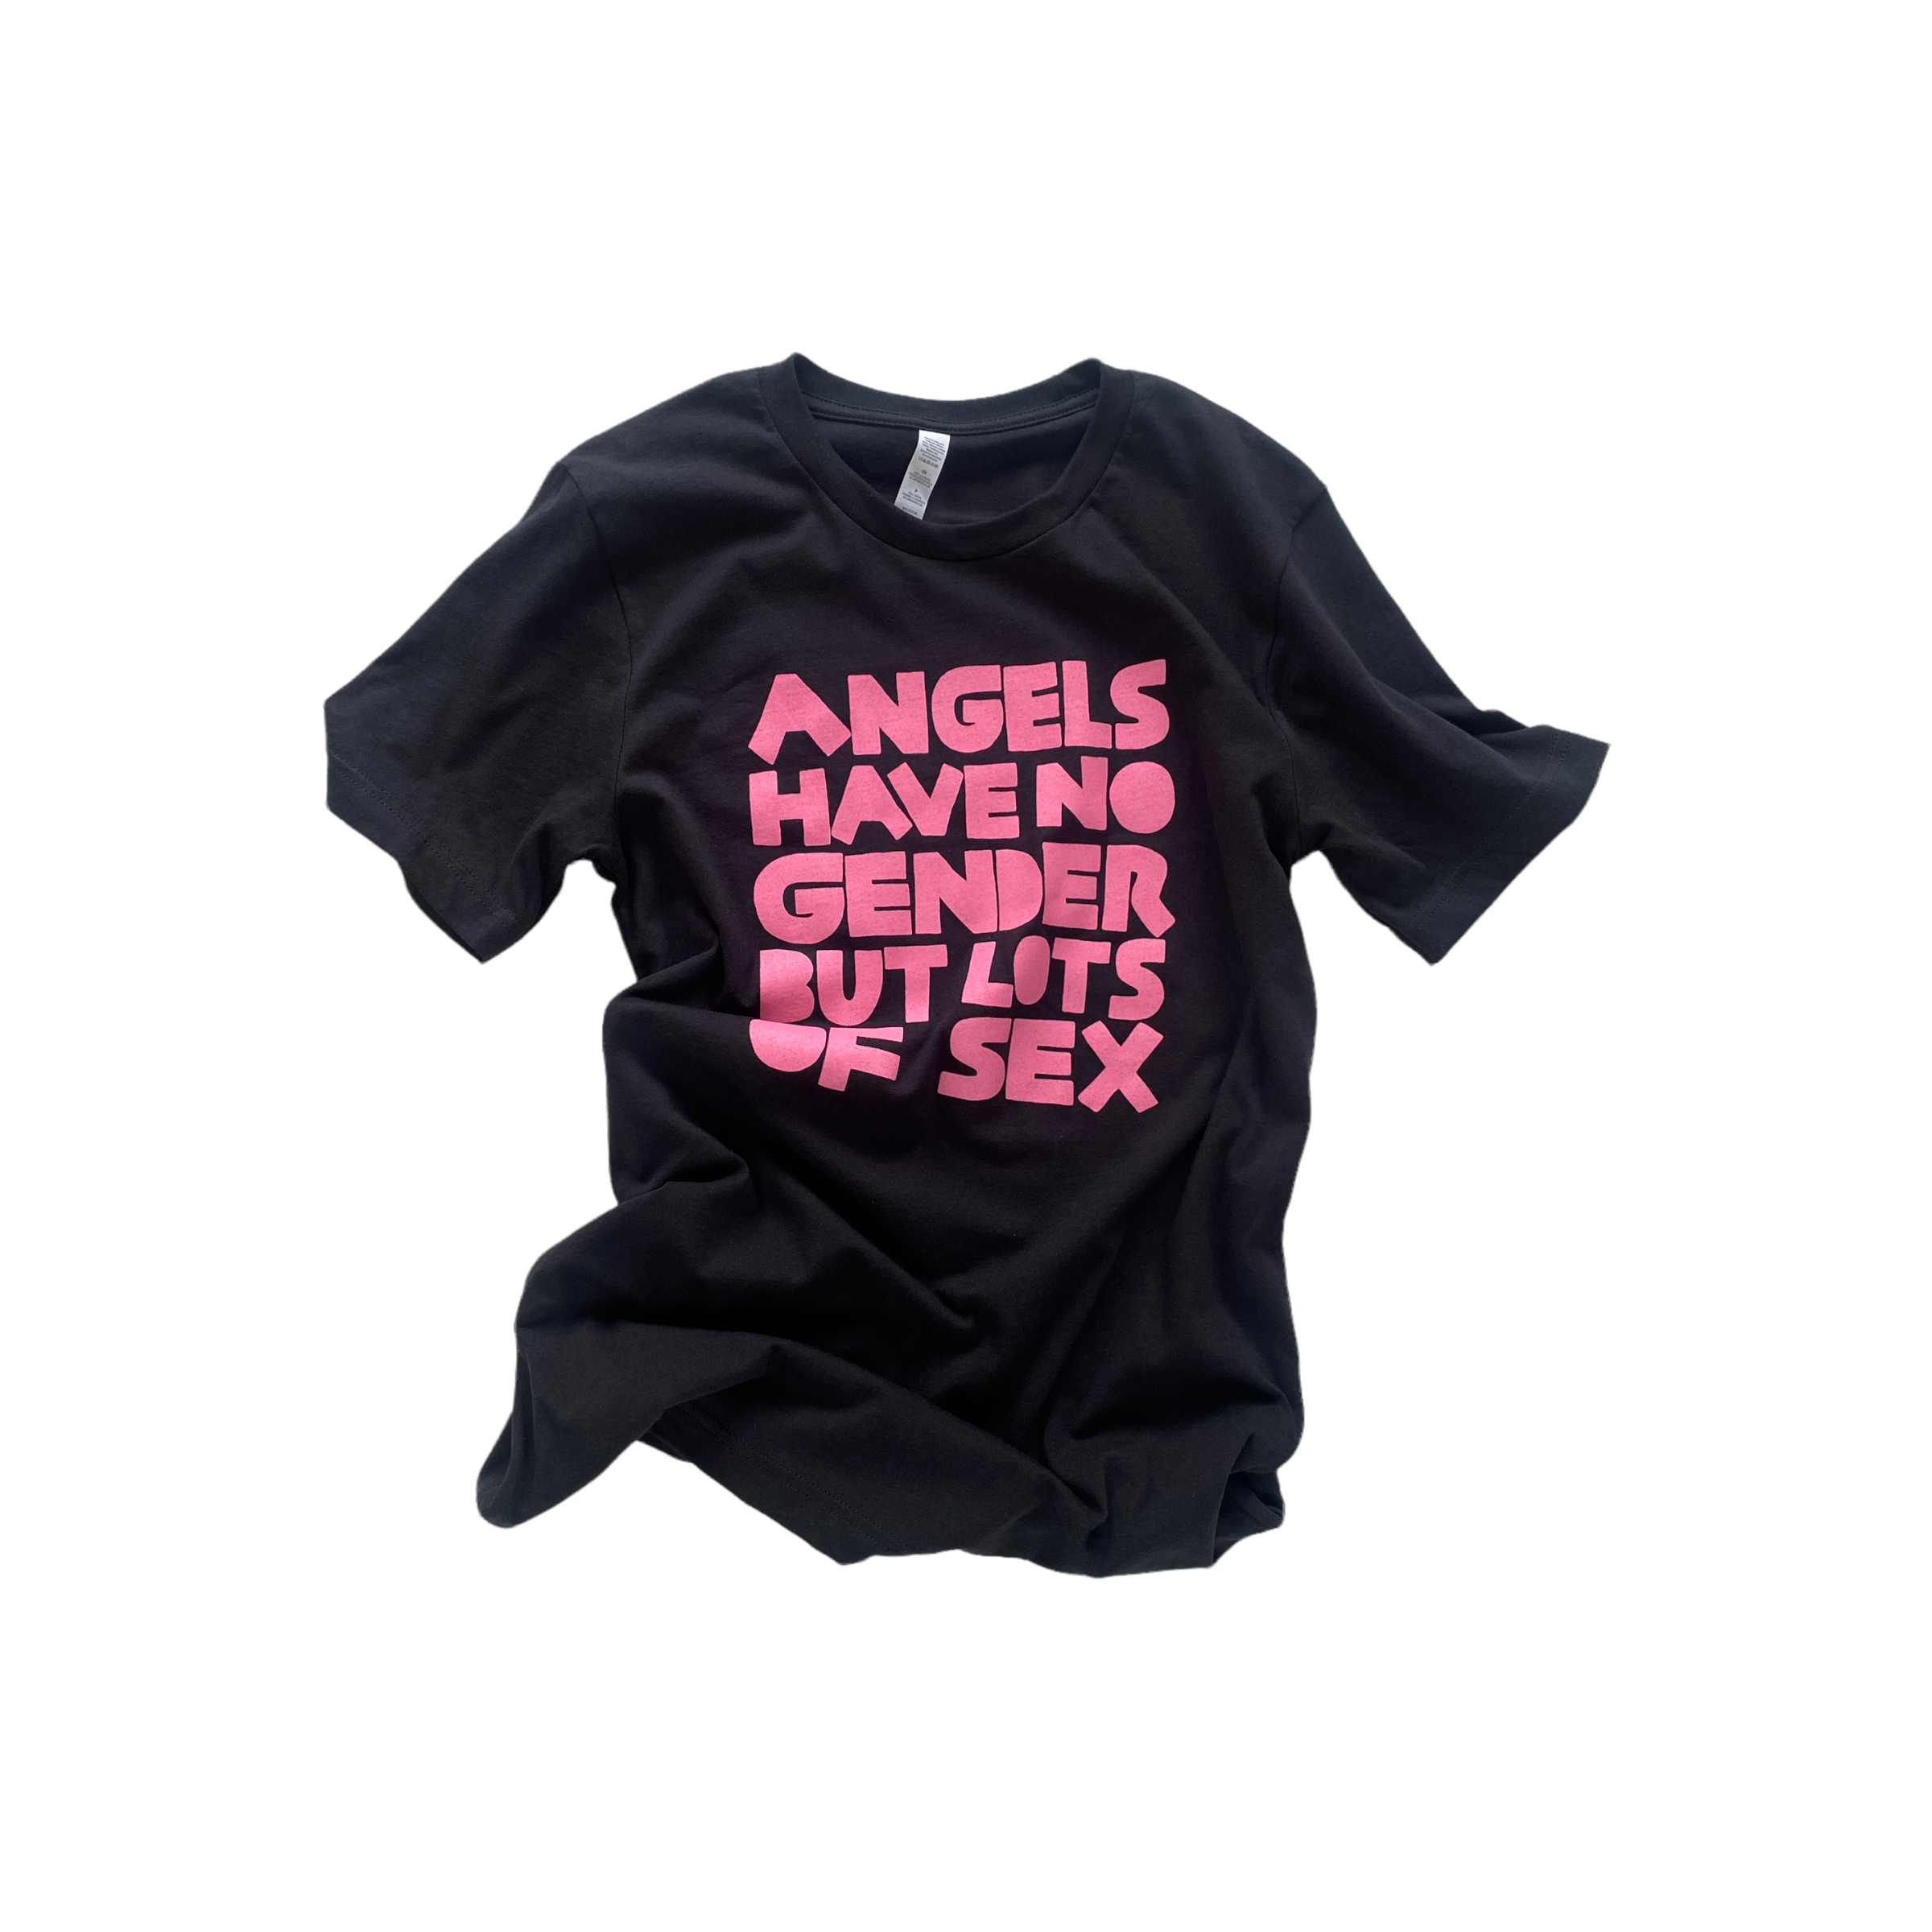 ANGELS HAVE NO GENDER BUT LOTS OF SEX T-shirt NSFW